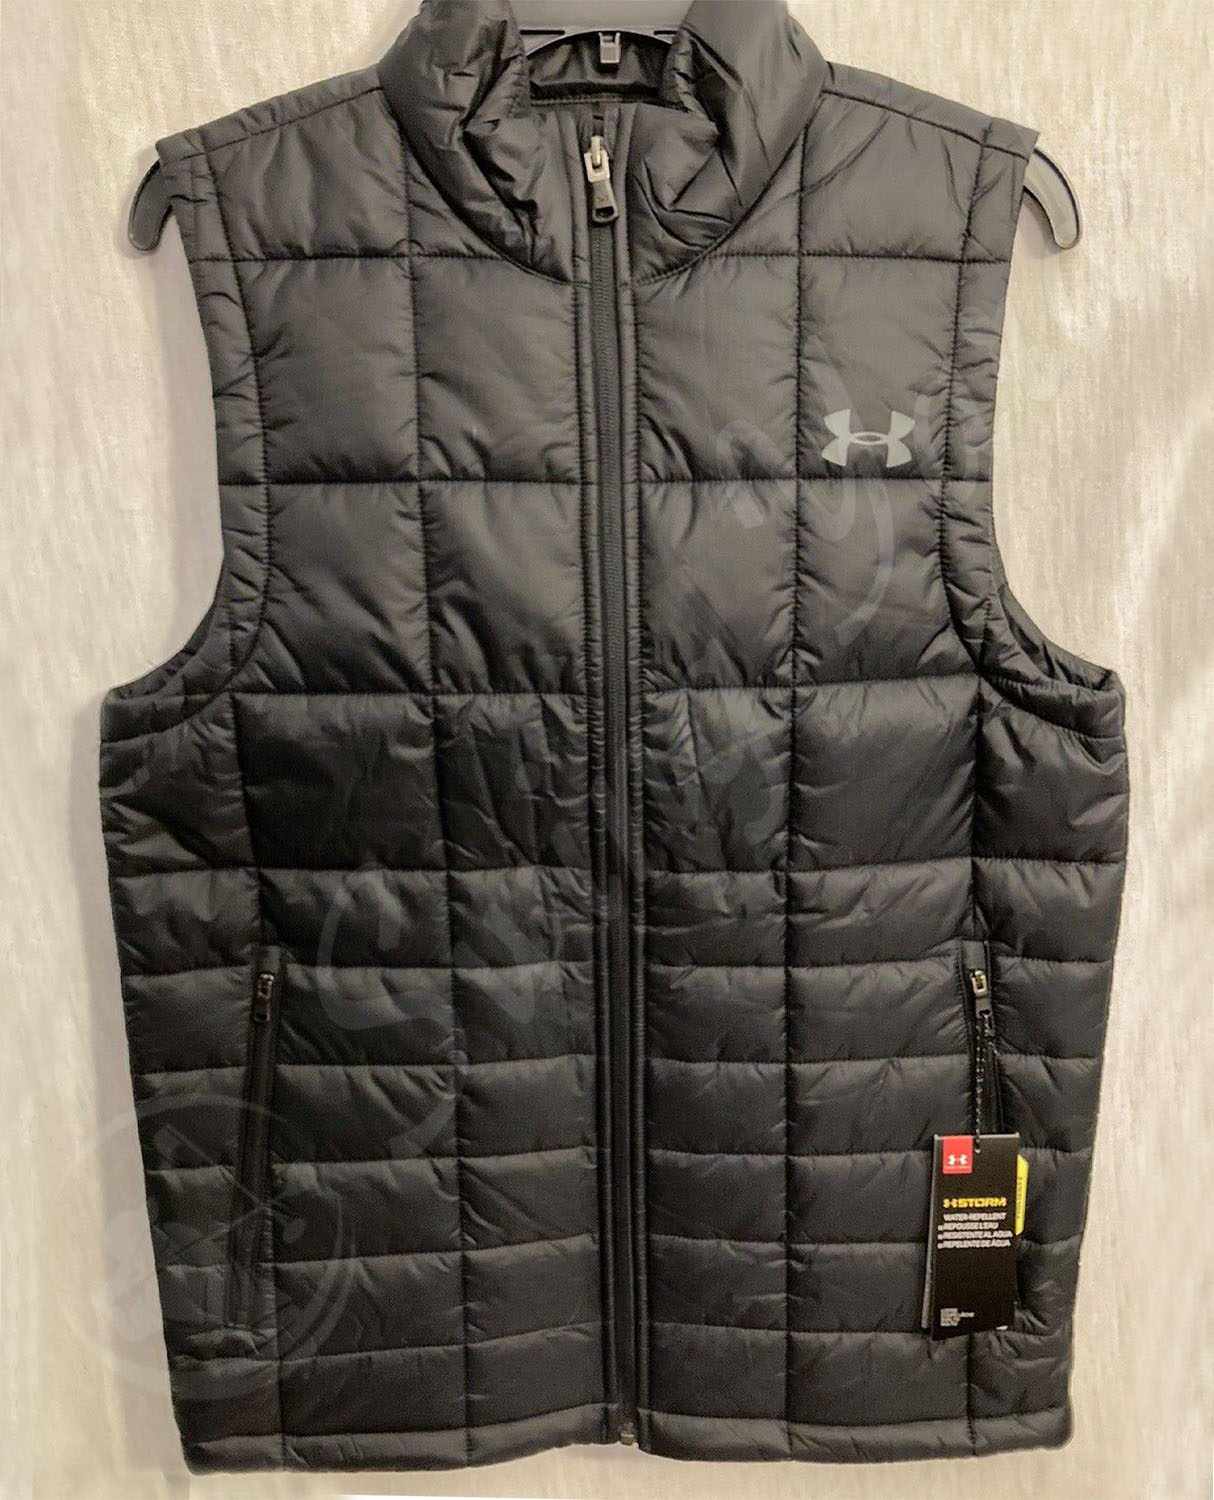 A new black Under Armour coldgear reactor cold weather golf vest for winter